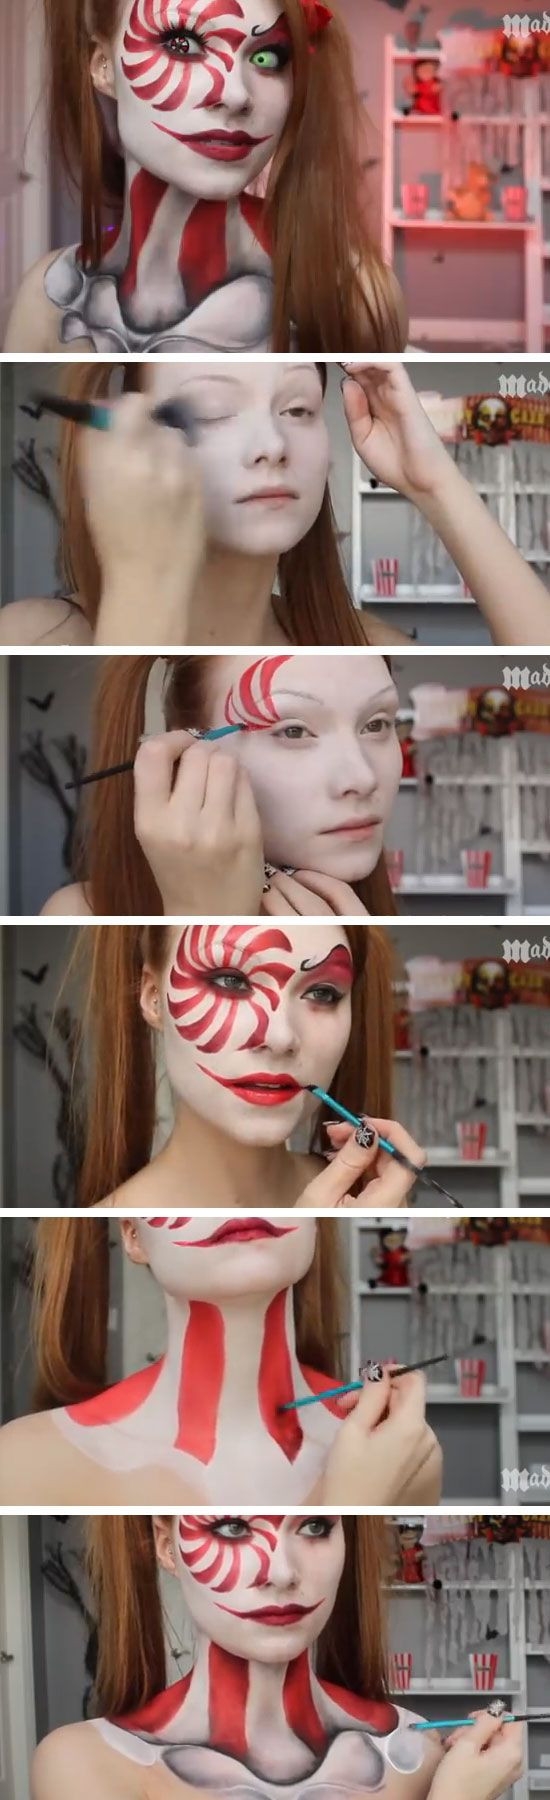 Easy Diy Halloween Costumes For Women
 25 Super Cool Step by Step Makeup Tutorials for Halloween